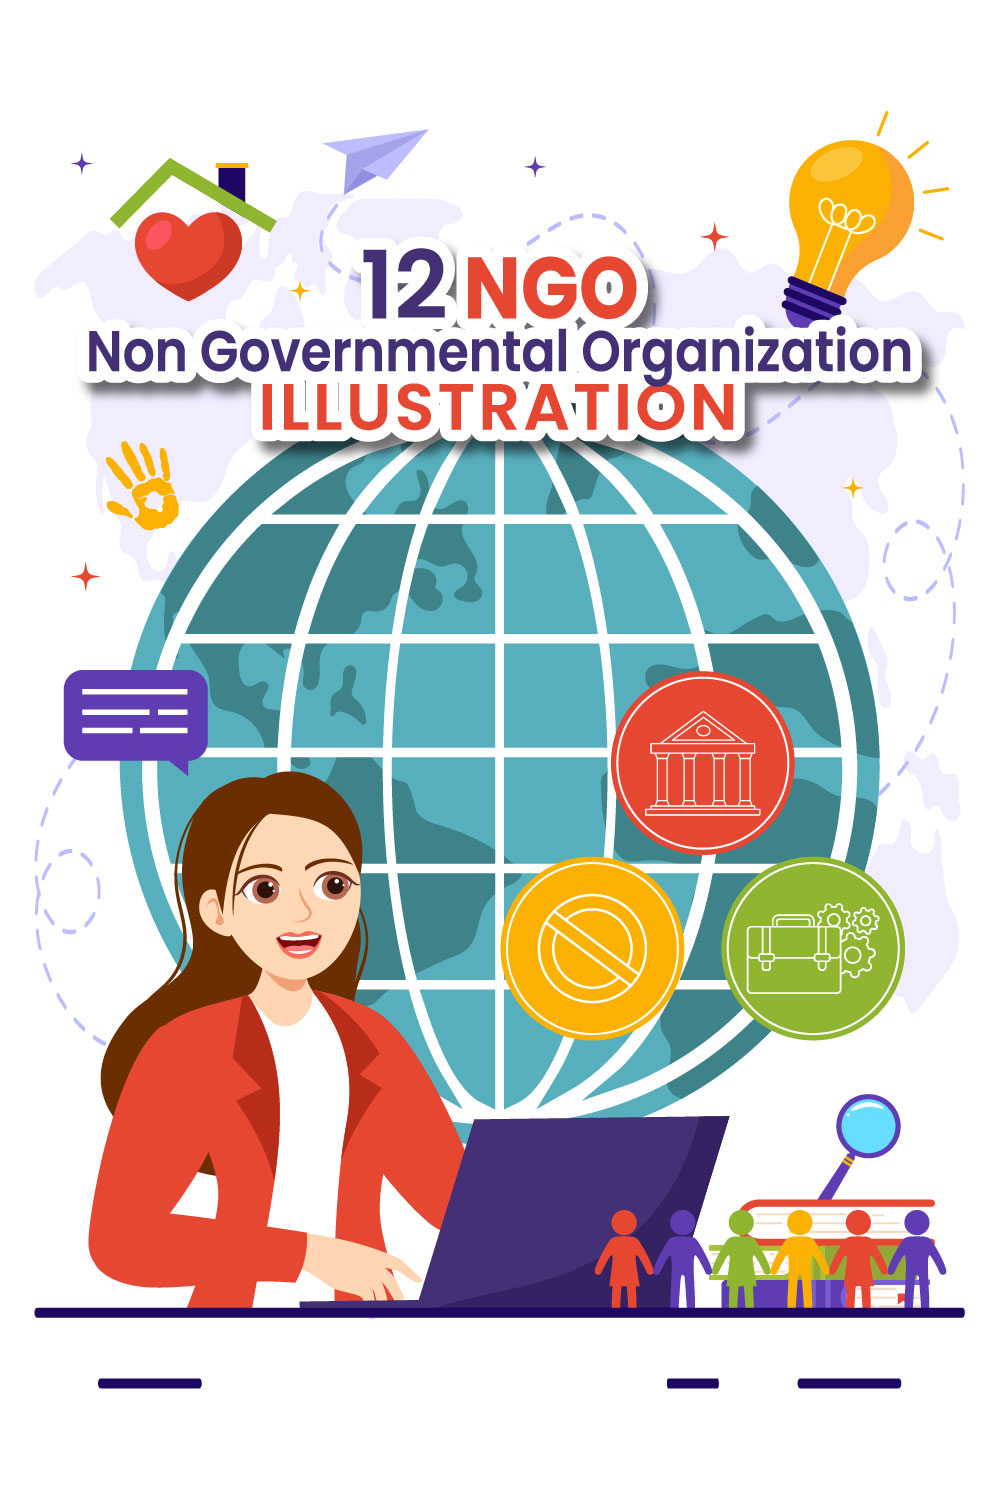 12 NGO or Non Governmental Organization Illustration pinterest preview image.